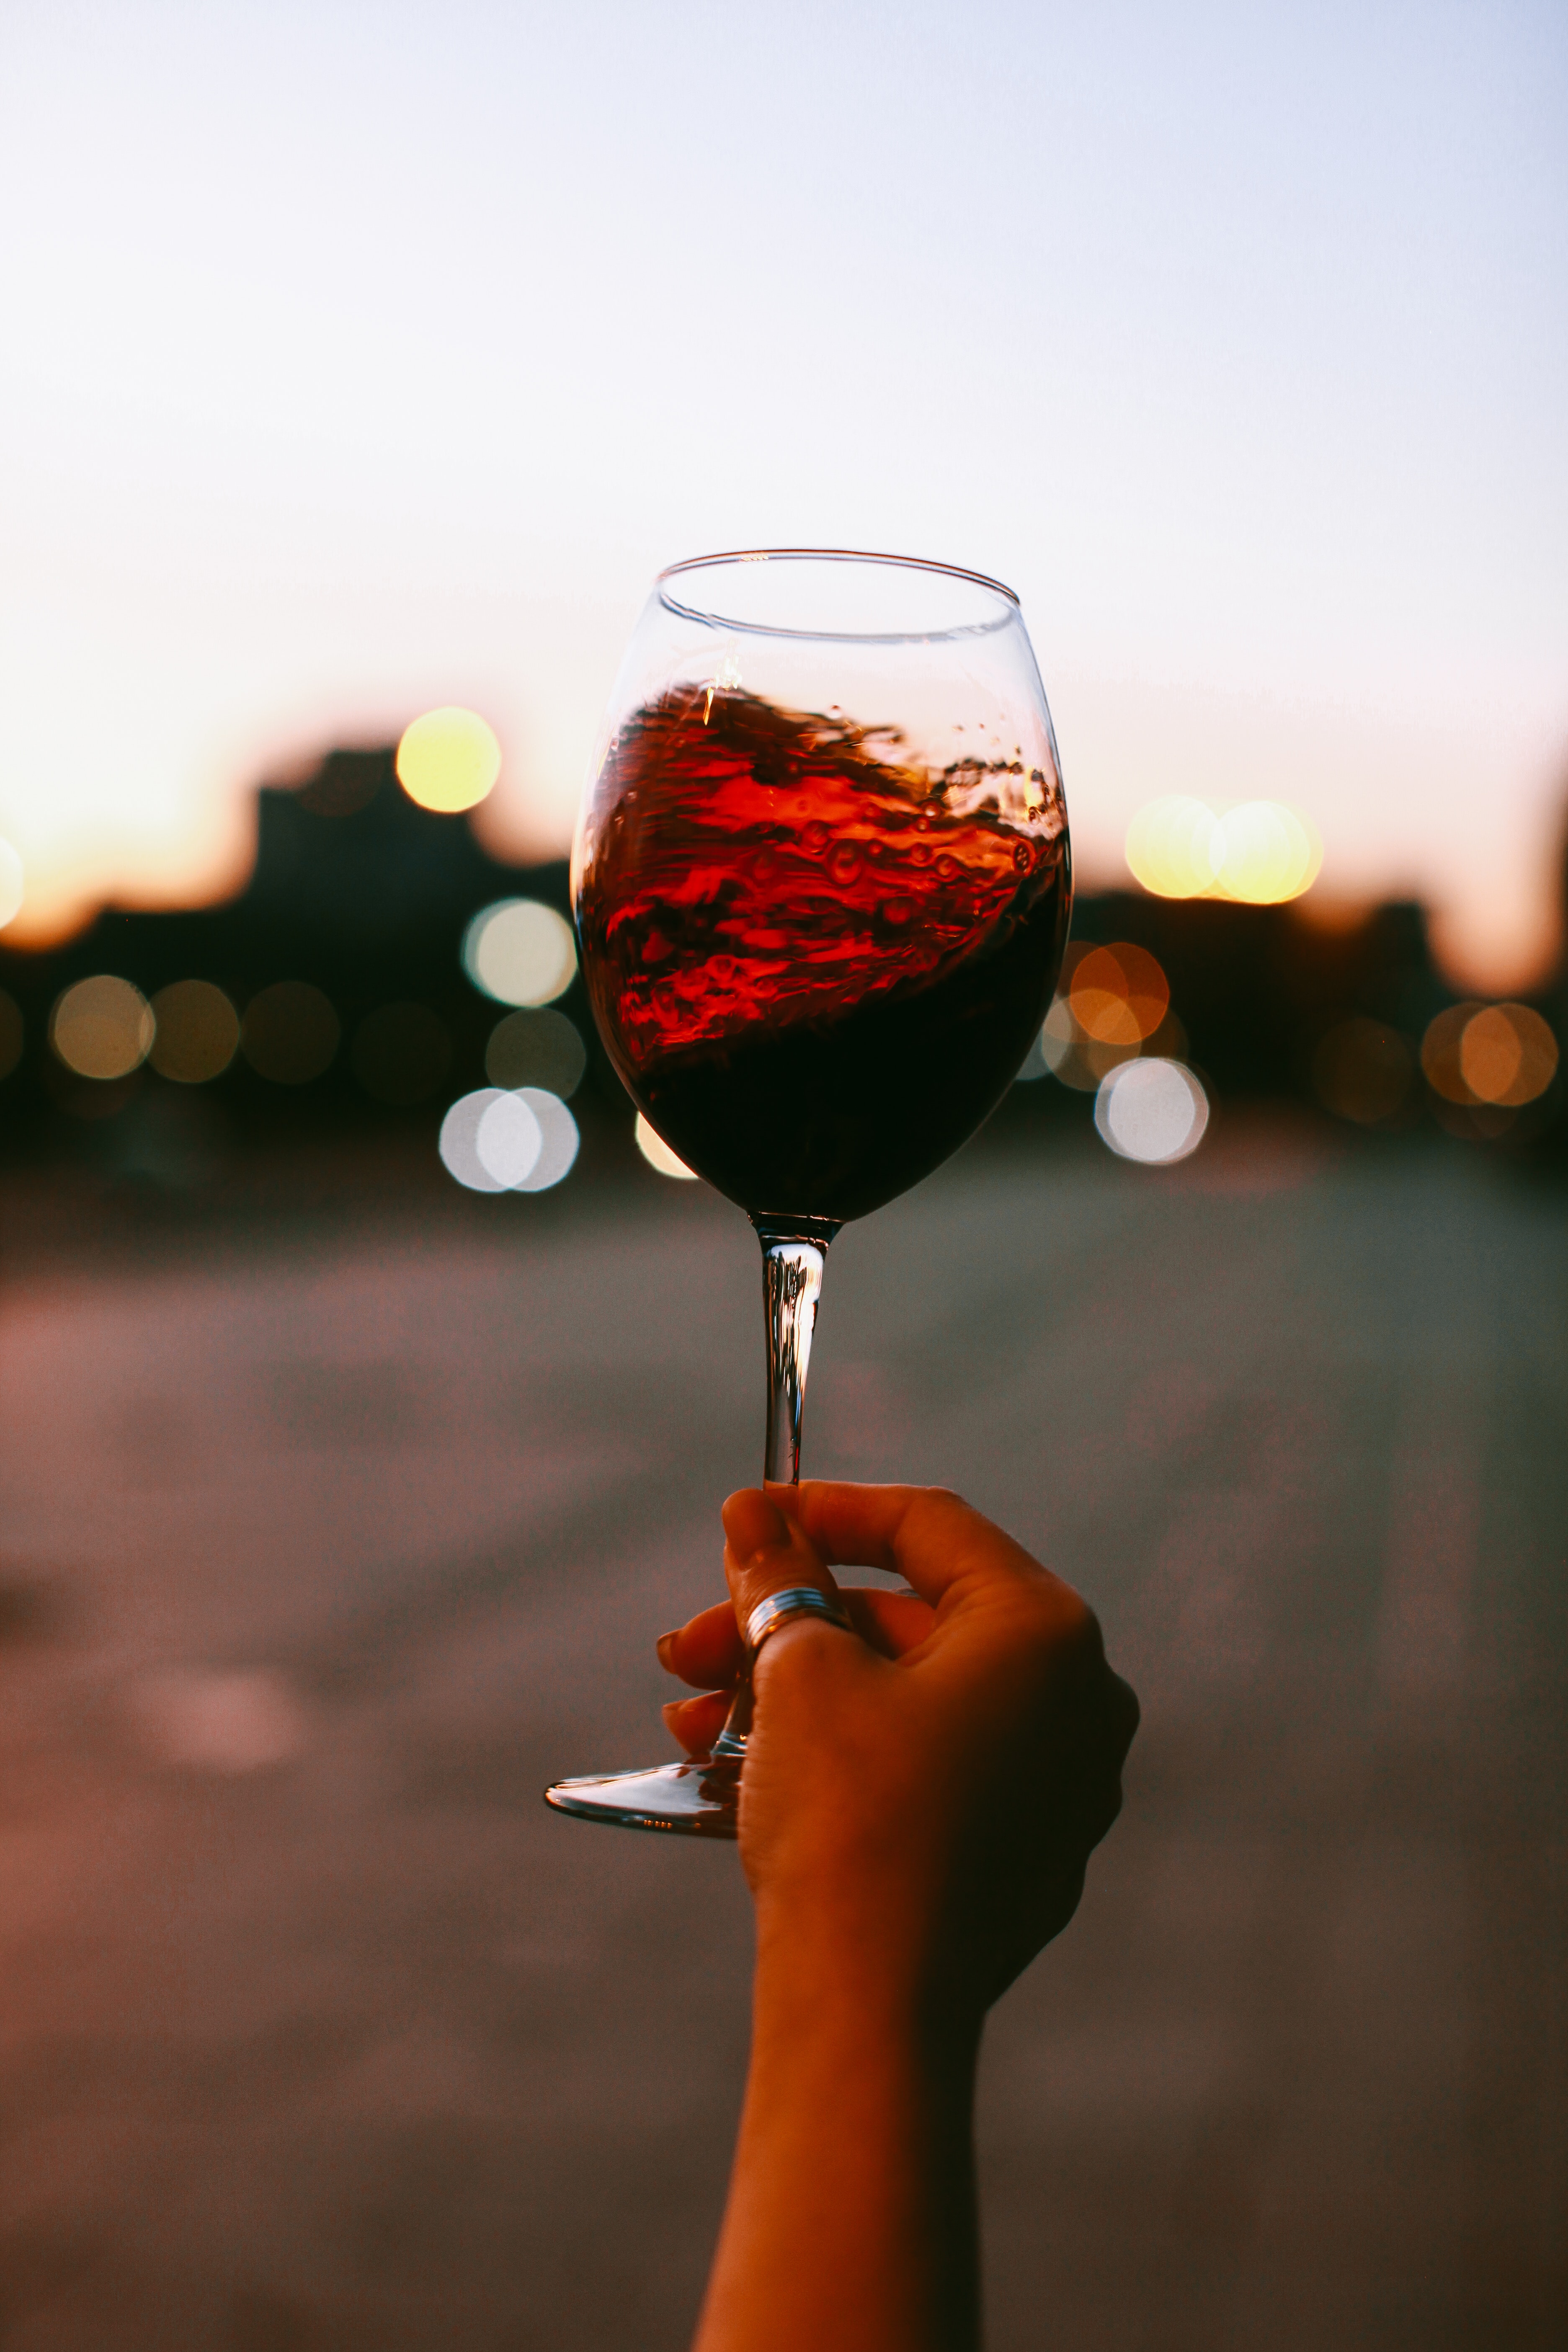 Women drinking wine: Myths and Facts